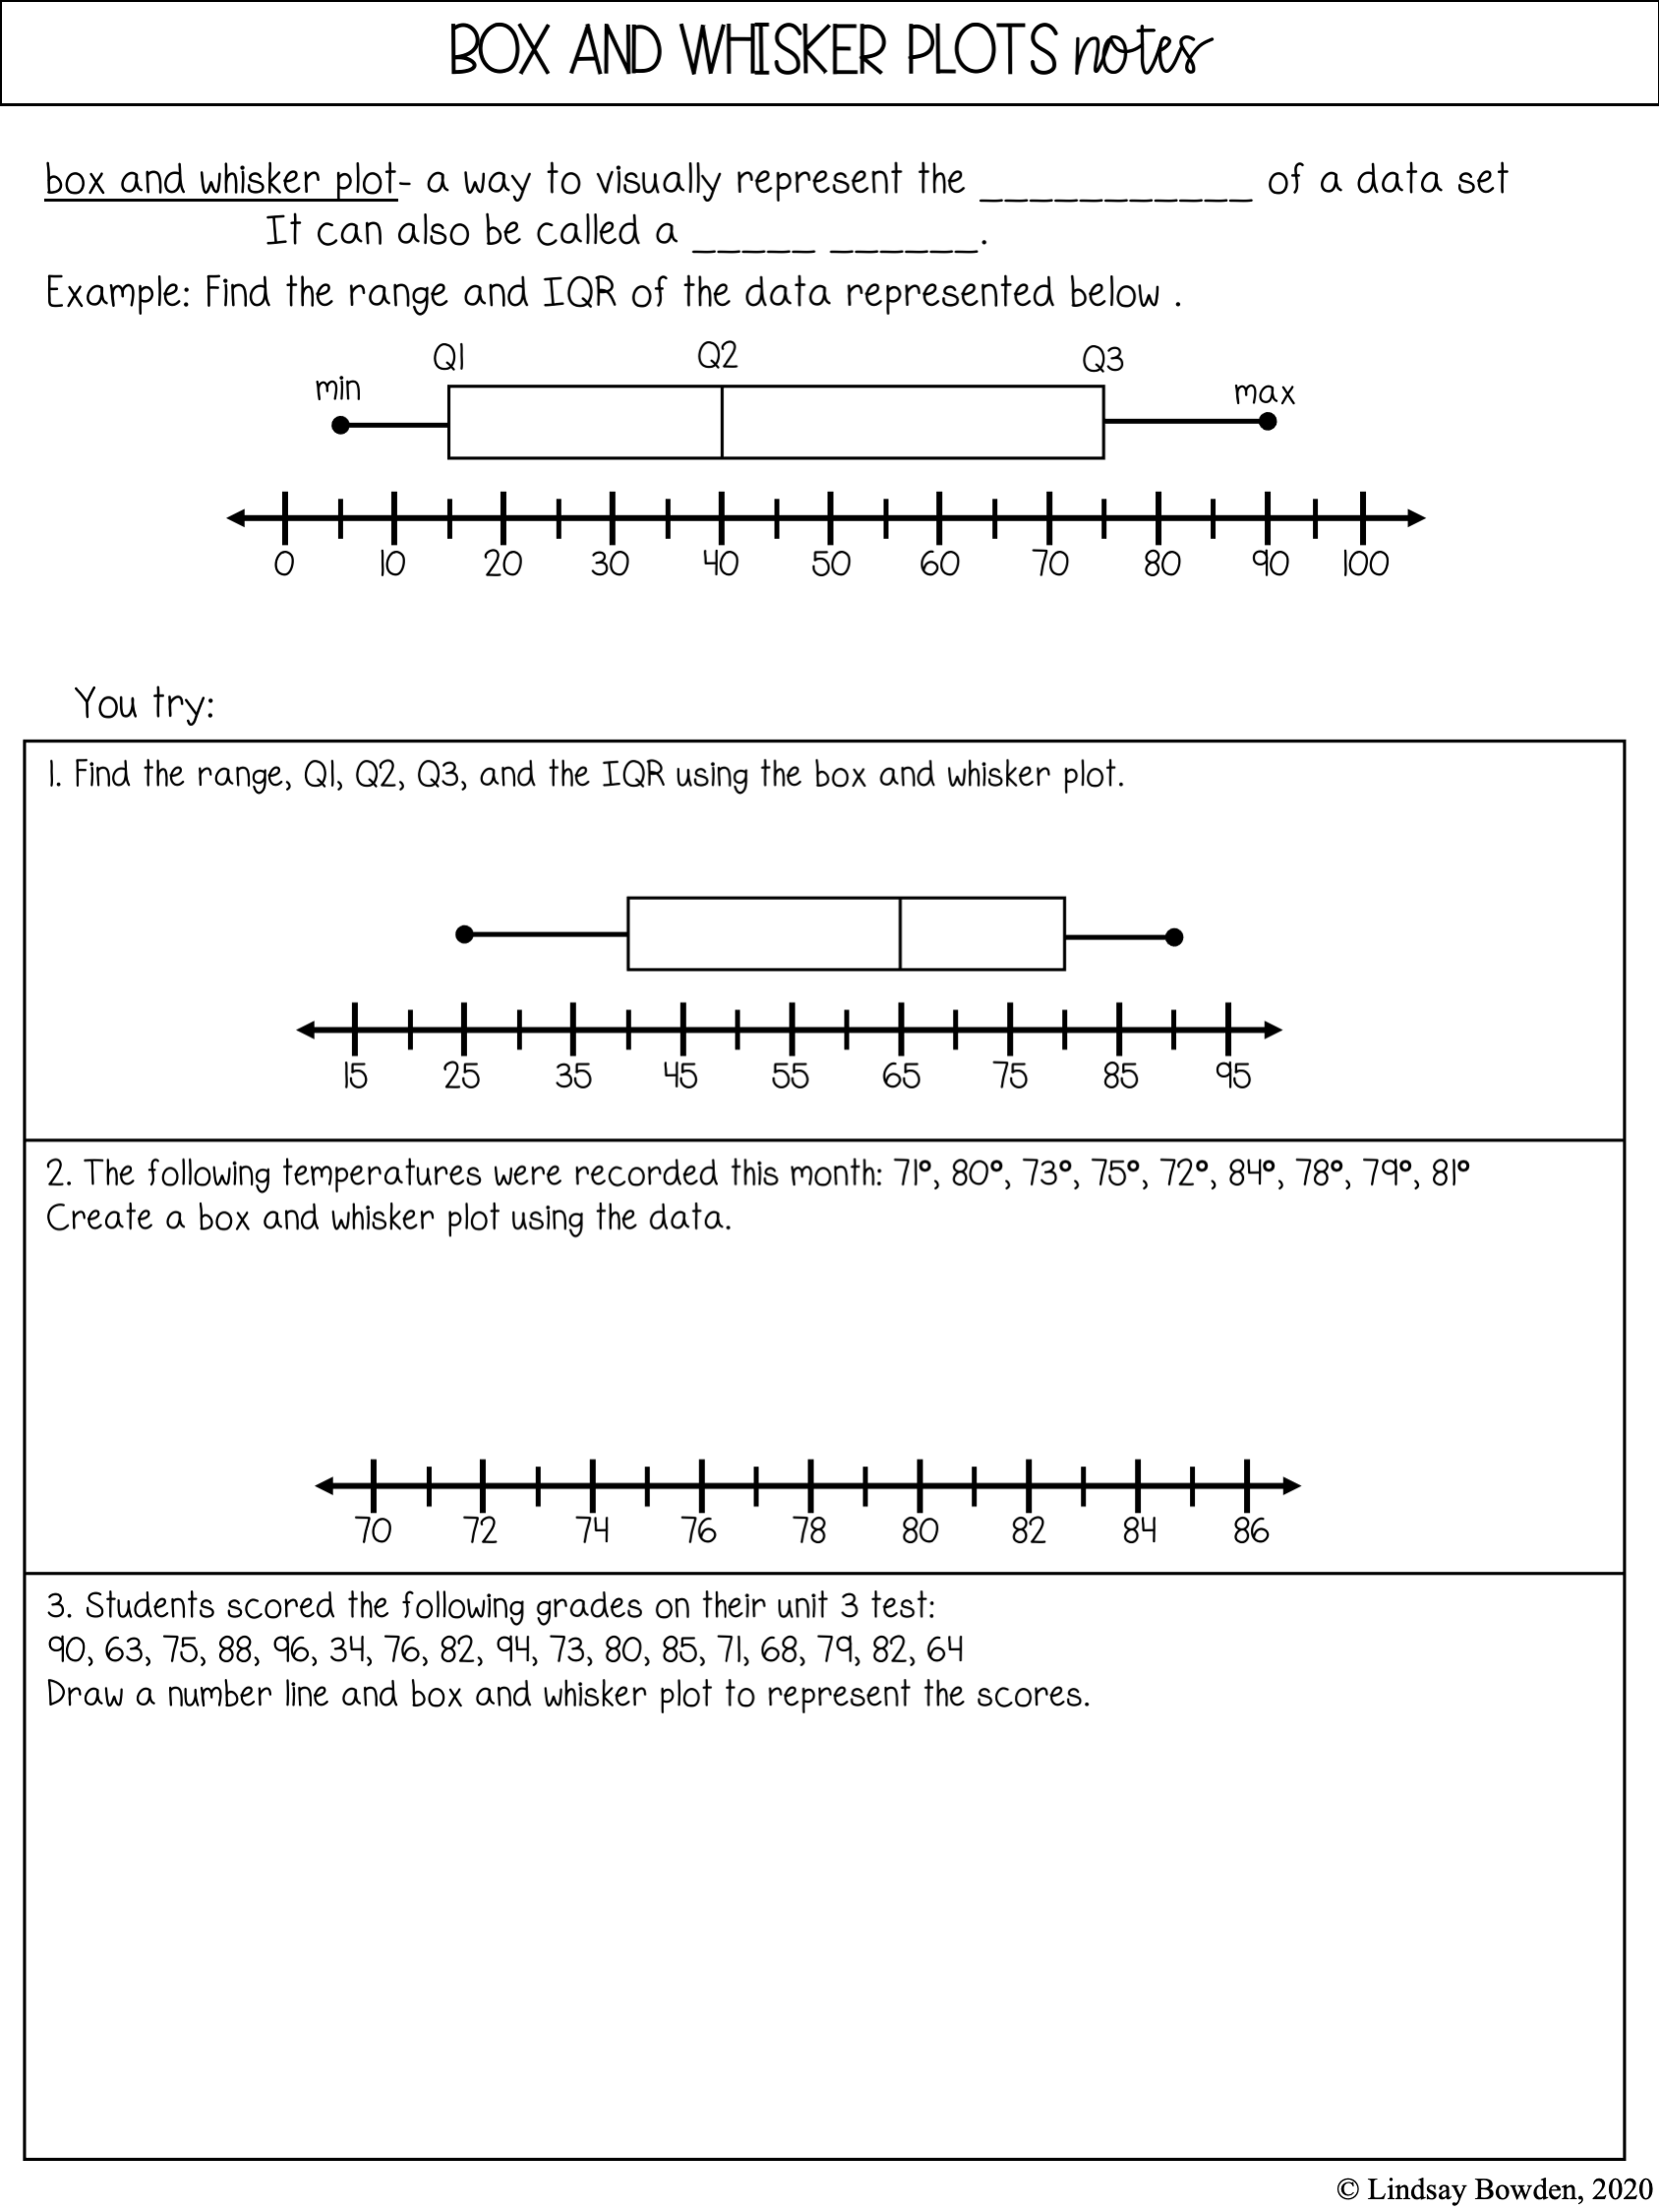 Box and Whisker Plots Notes and Worksheets - Lindsay Bowden With Regard To Box And Whisker Plot Worksheet